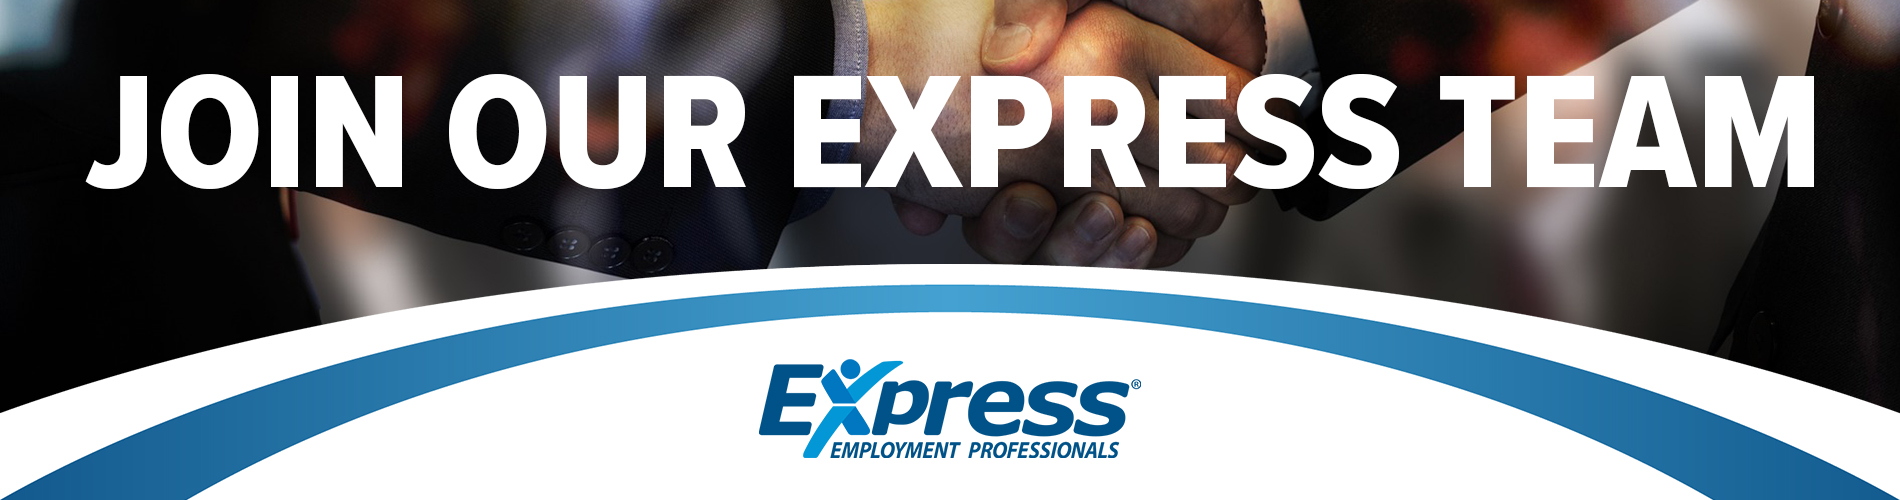 Join Our Express Team, Champaign-Urbana Recruiting Jobs